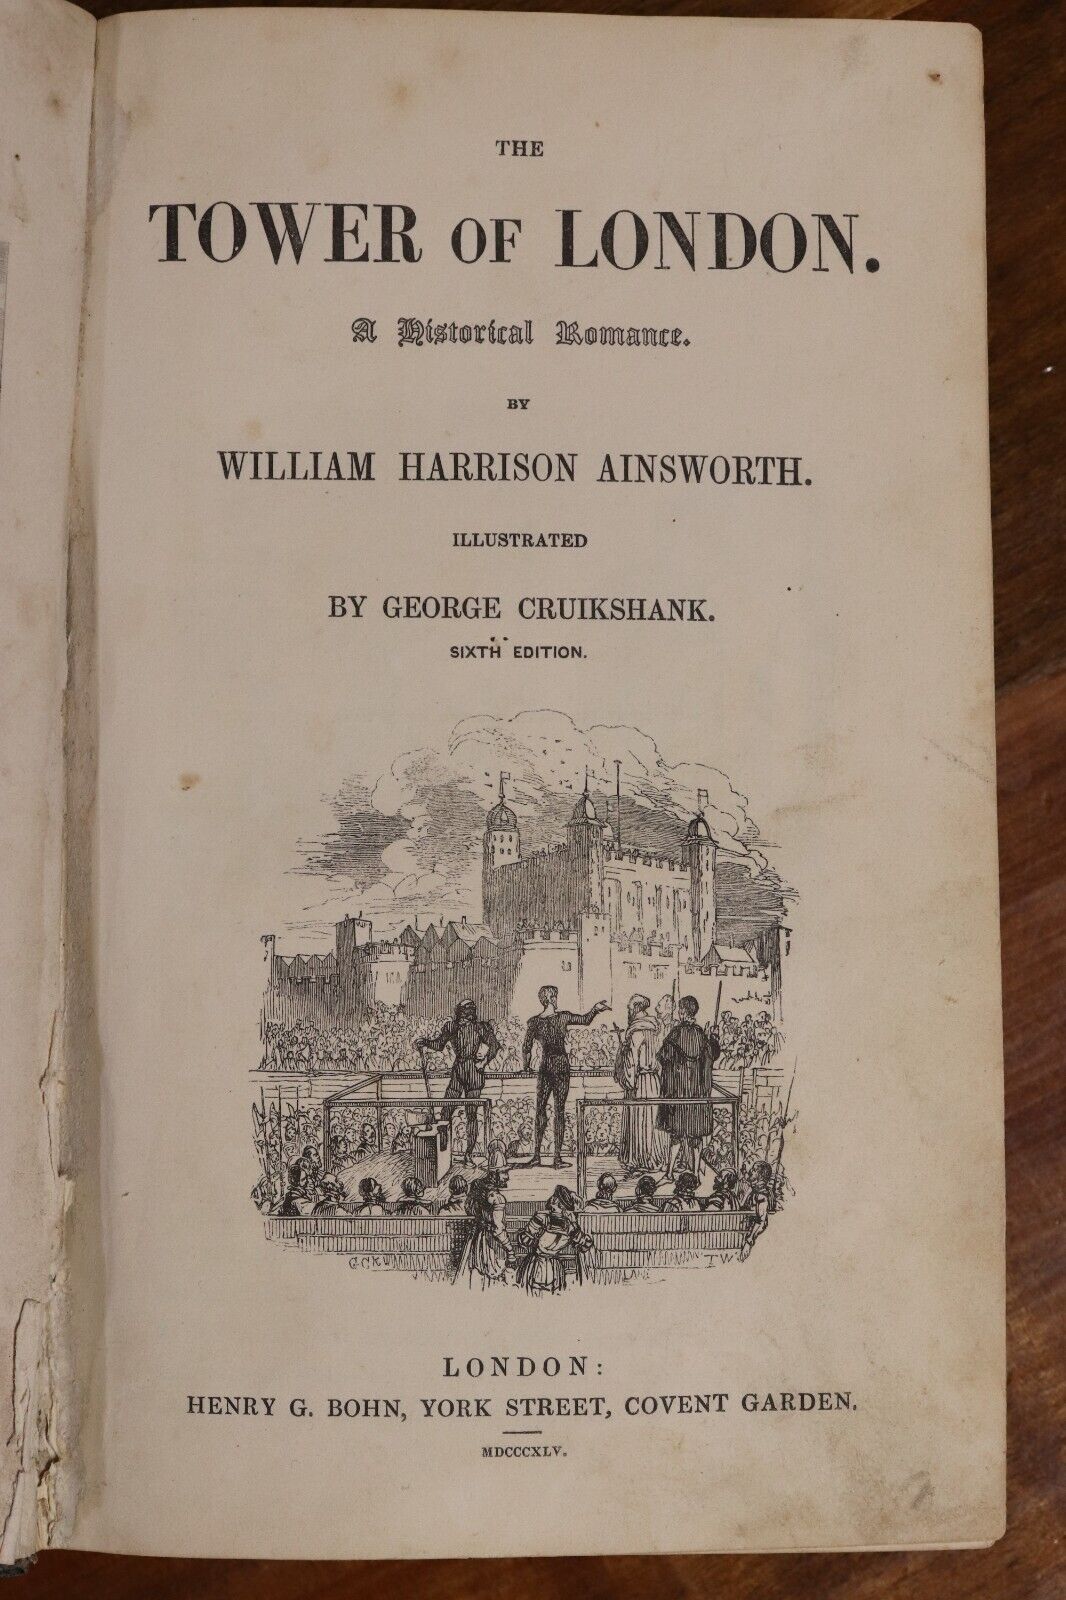 The Tower Of London by WH Ainsworth - 1845 - Antique British History Book